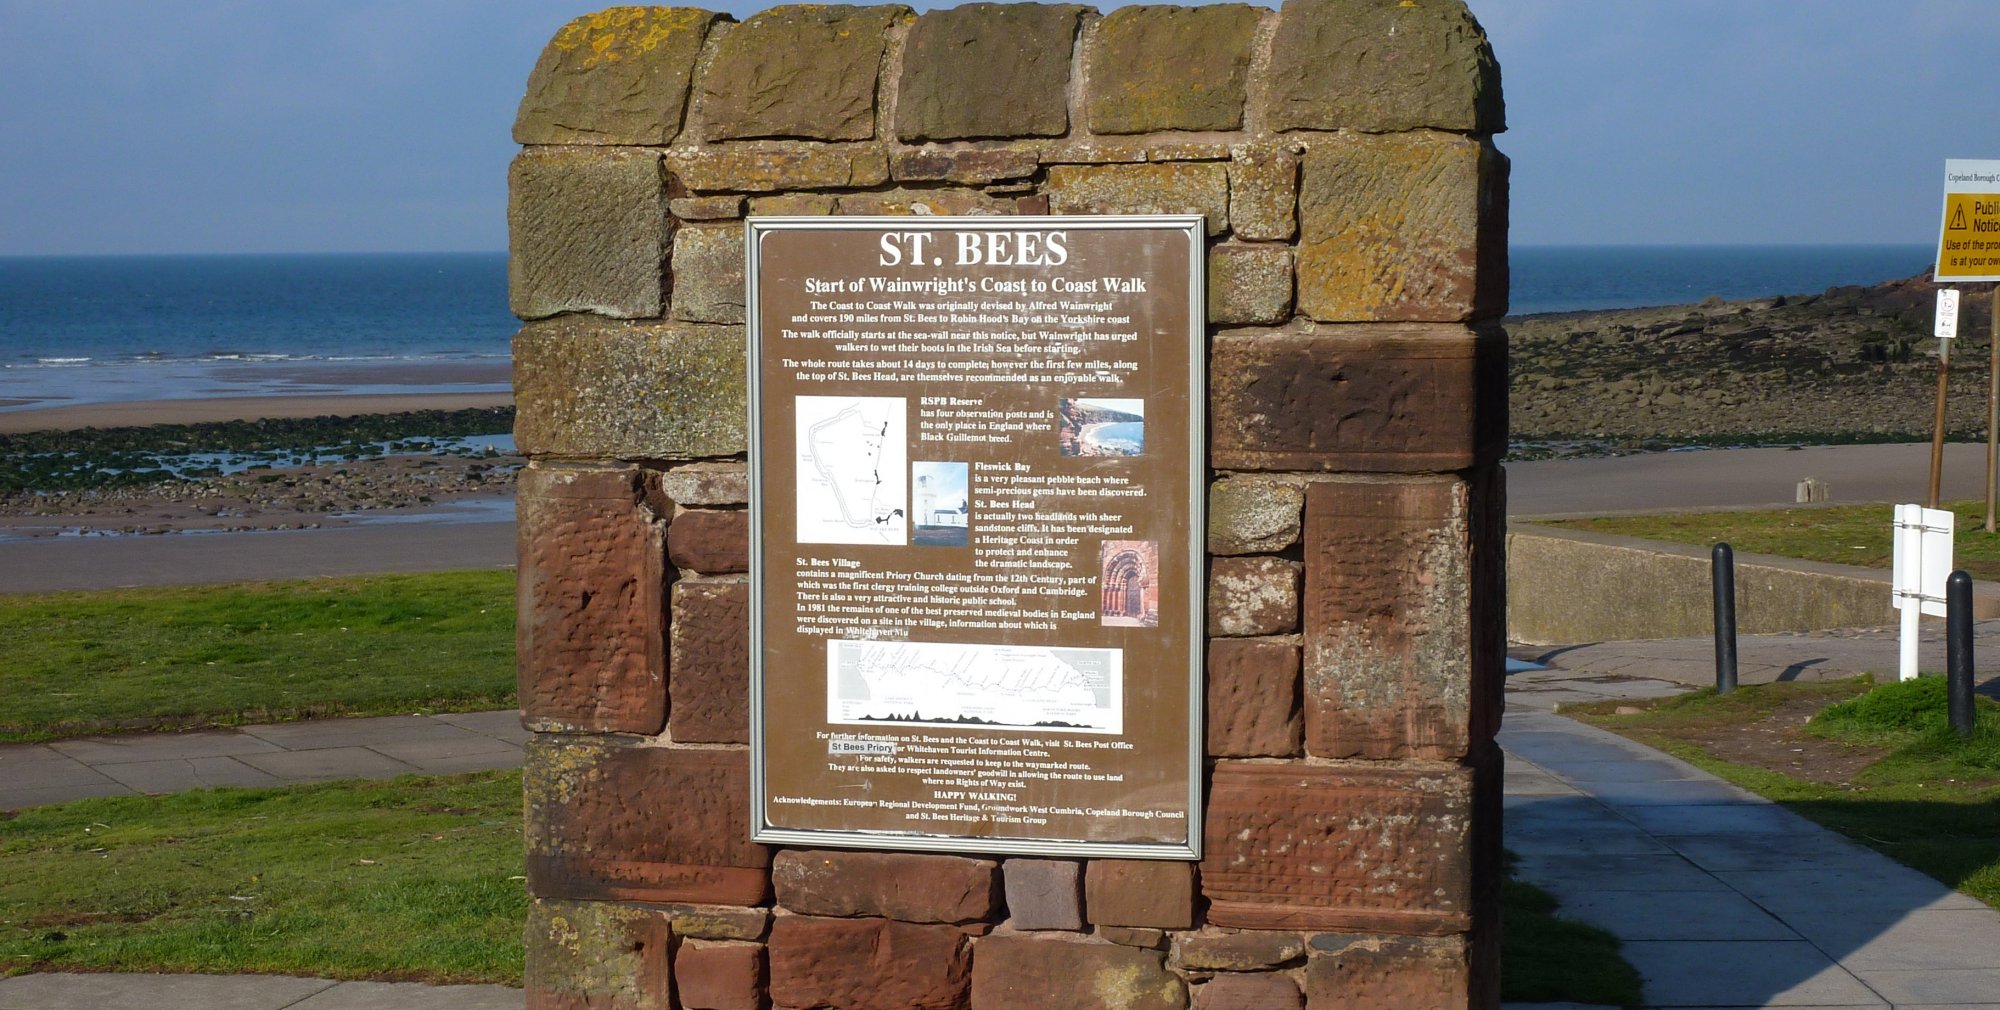 My final destination, in St. Bees